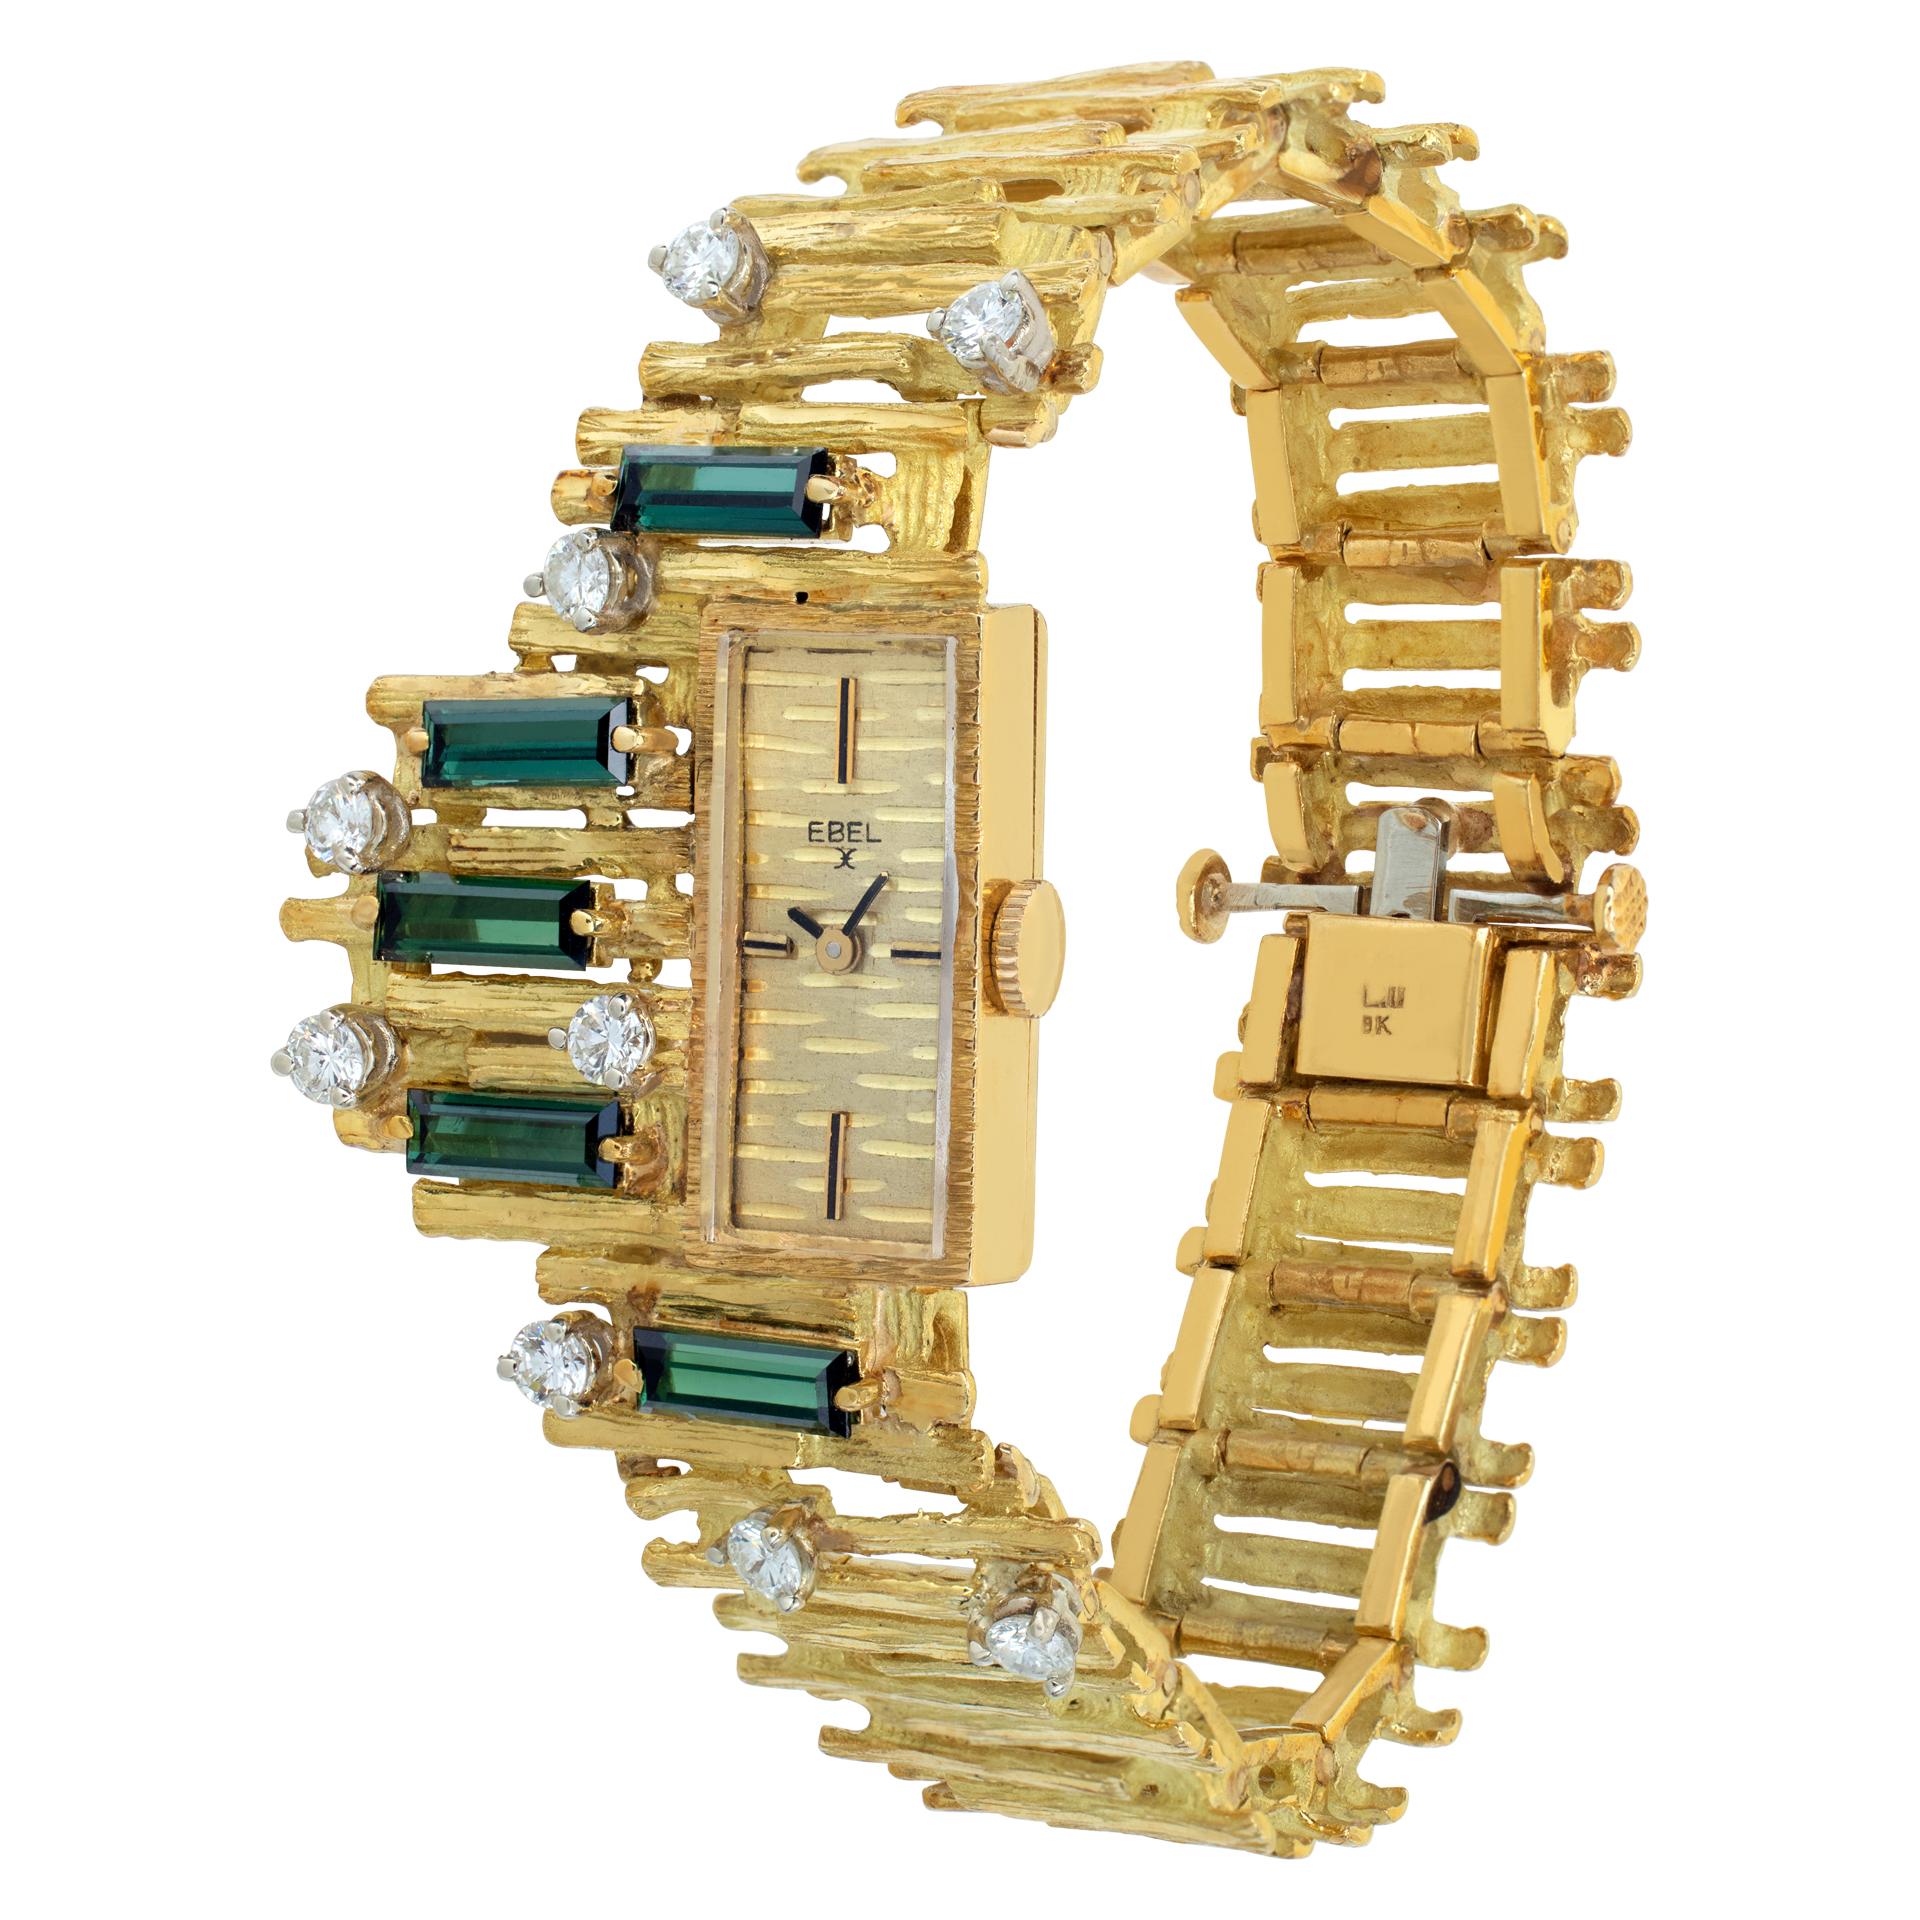 Ebel Vintage Cocktail watch with tourmalines and diamonds in 18k yellow gold with bark finish bracelet. Approximately 1 carat in G-H color, VS clarity diamonds. Total length 6.5 inches. Case measures 20mm long by 10mm wide. Circa 1956. Fine